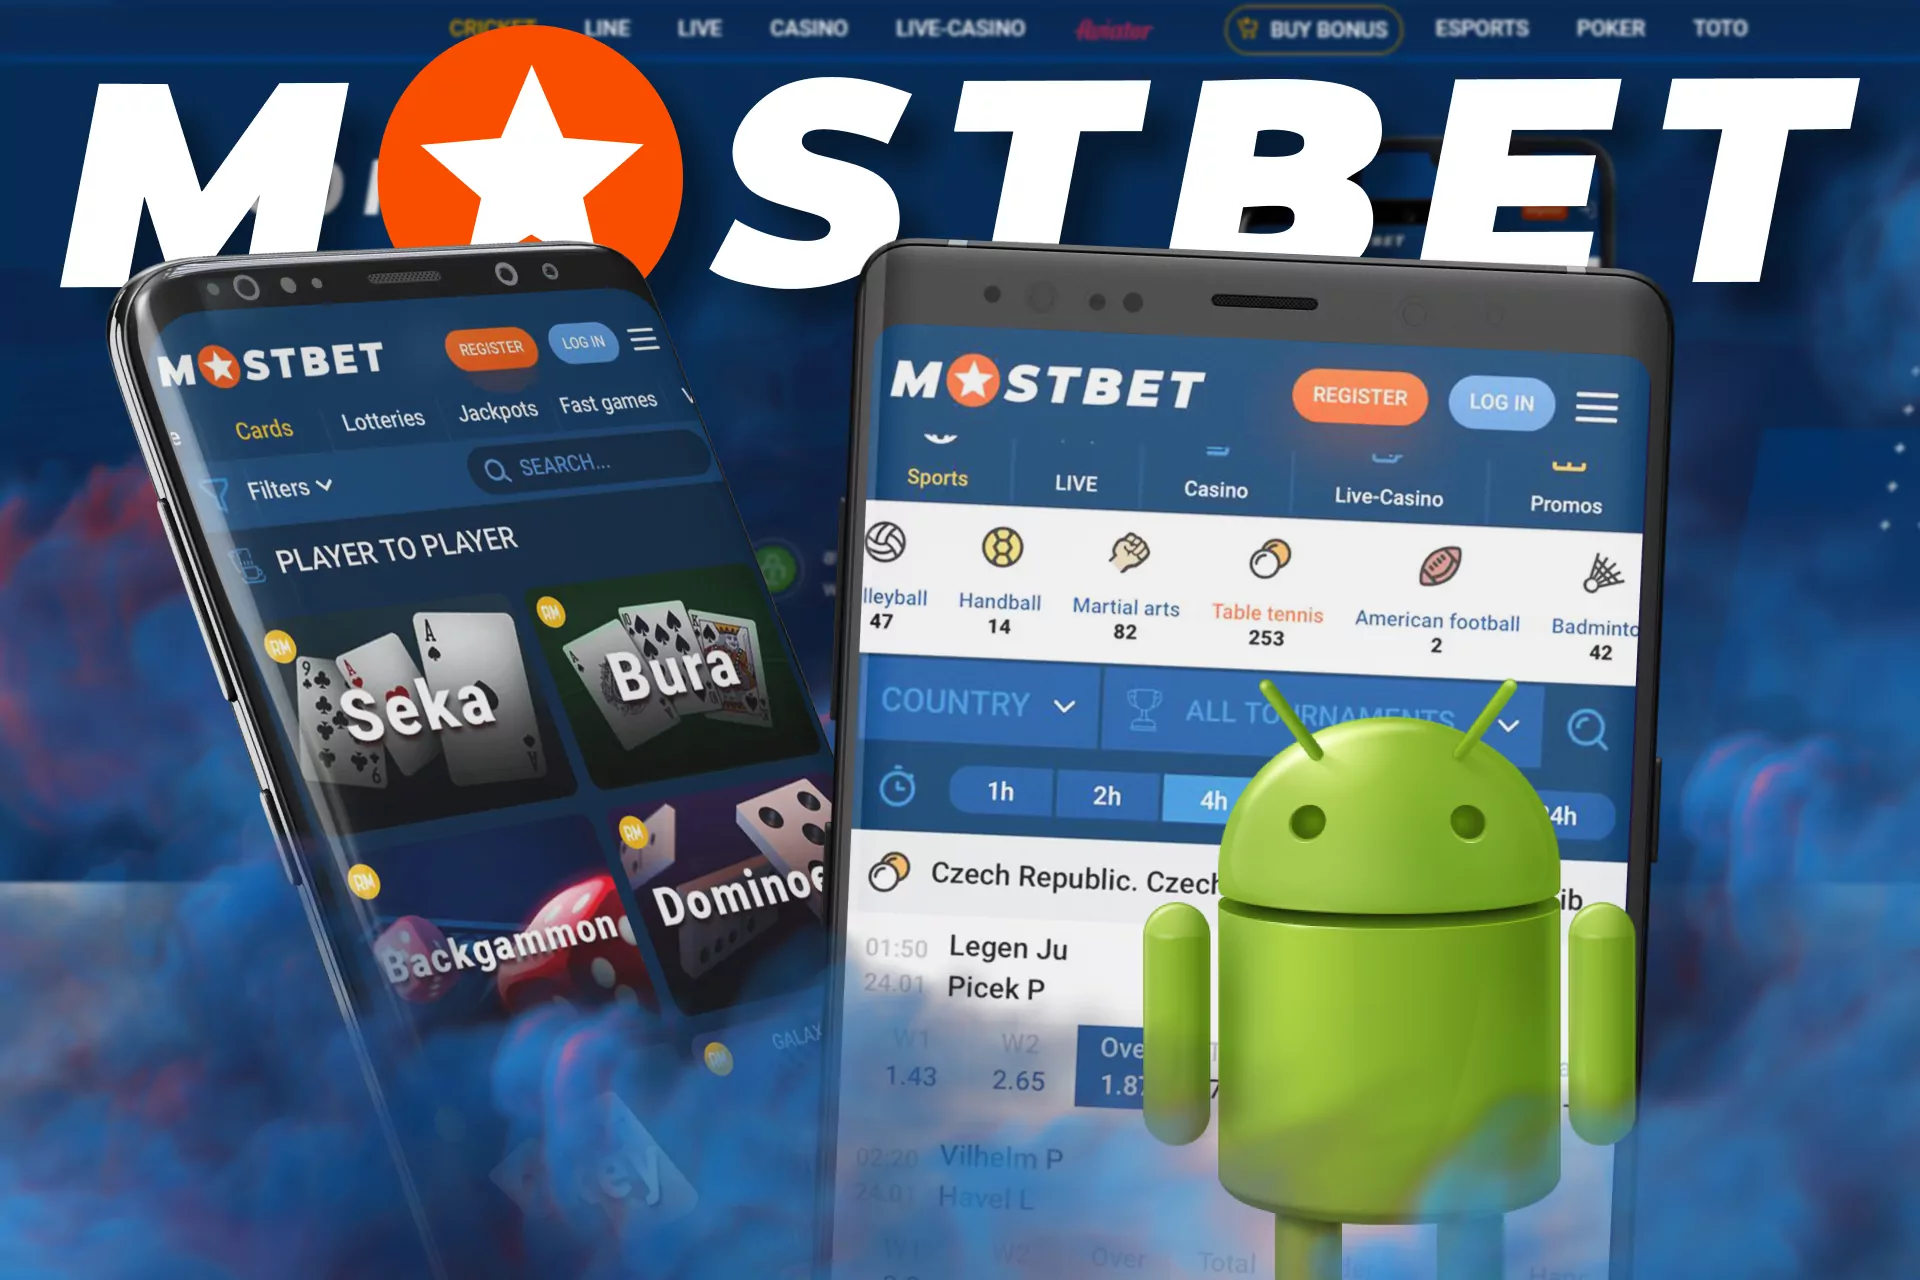 Use the Mostbet app for Android to bet on sports and play casino games.